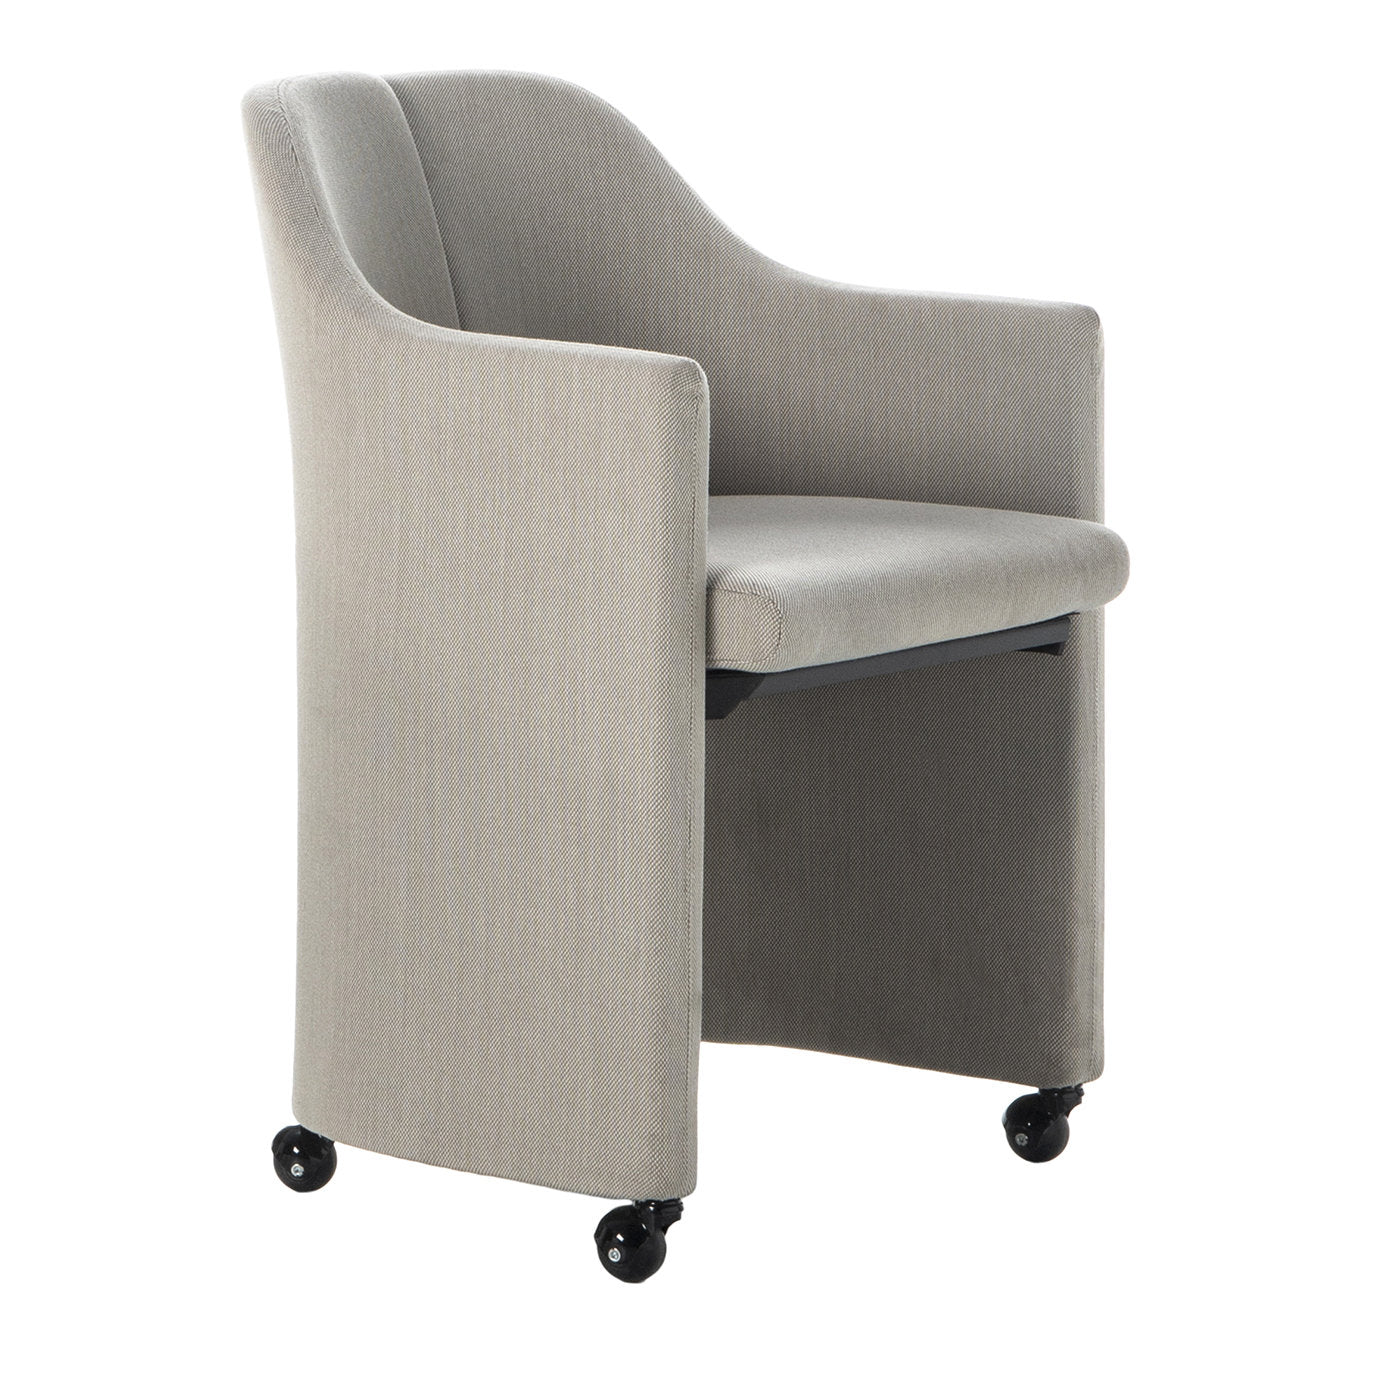 S142 Beige Tall Armchair with Casters by Eugenio Gerli - Main view